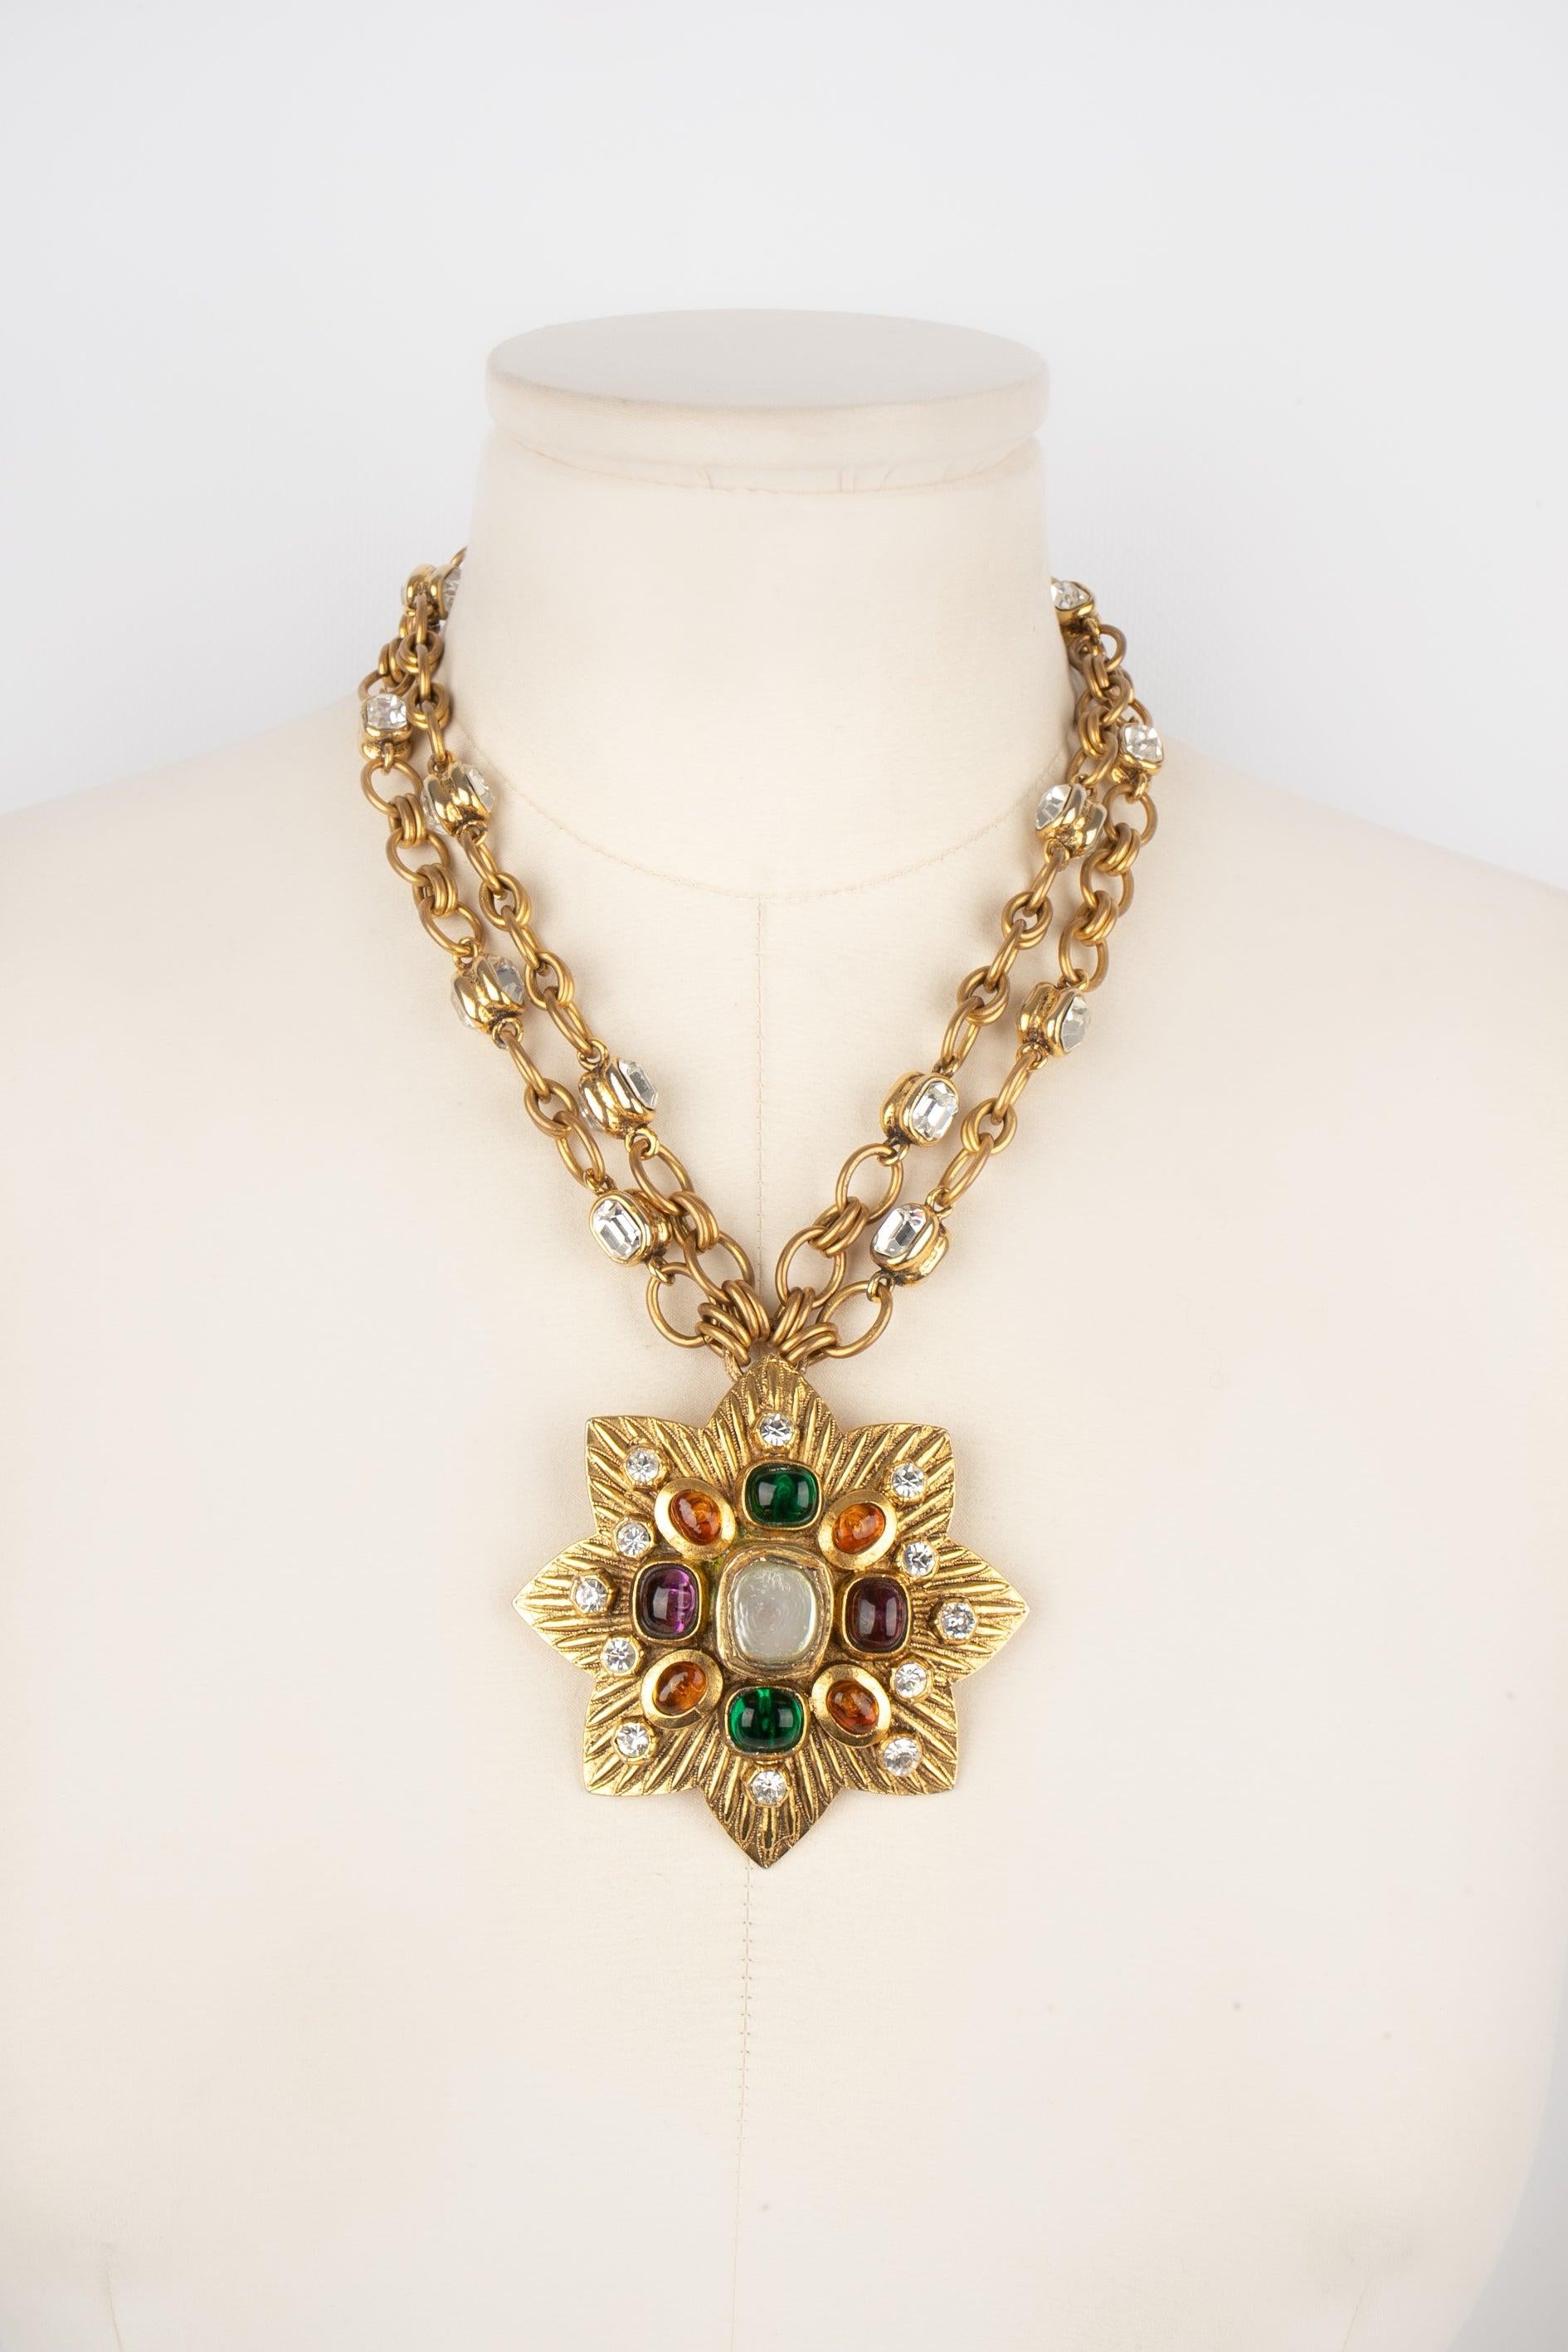 Chanel- (Made in France) Golden metal two-row necklace with rhinestones and with a golden metal pendant ornamented with rhinestones and glass paste. 1985 Collection.

Additional information:
Condition: Very good condition
Dimensions: Length: 44